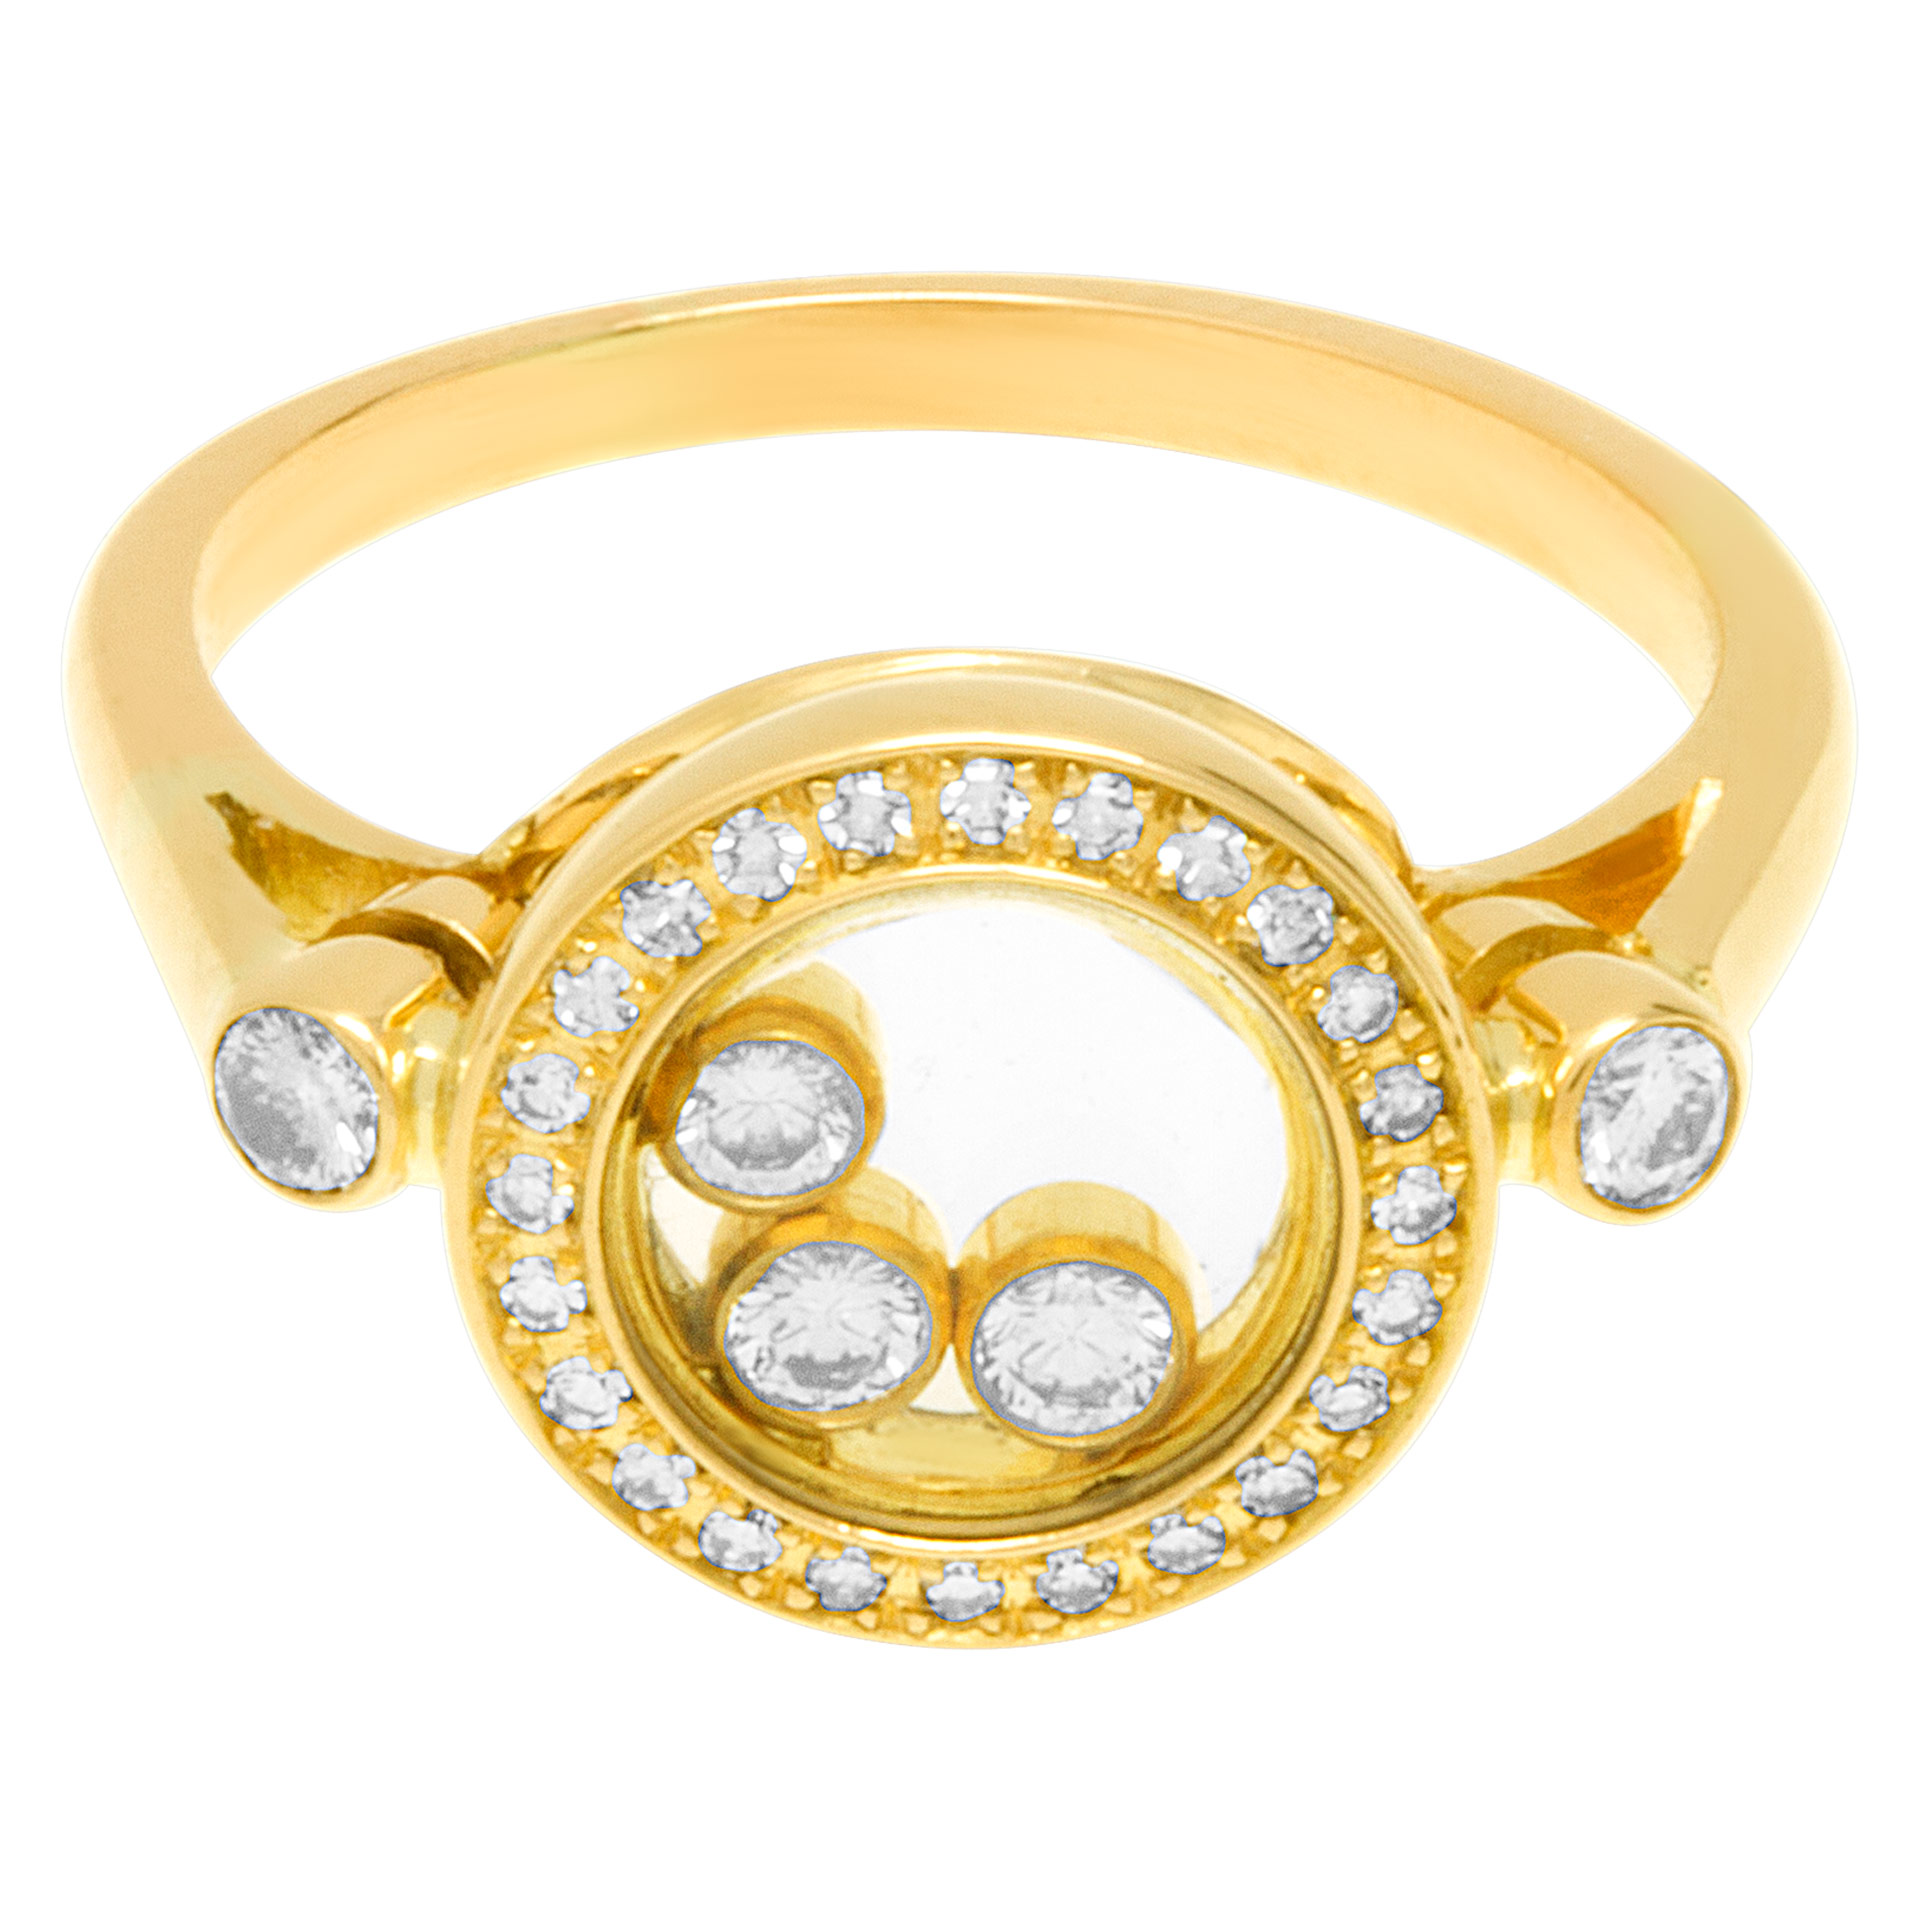 Chopard Happy Diamonds ring in 18k yellow gold with 3 floating diamonds image 1